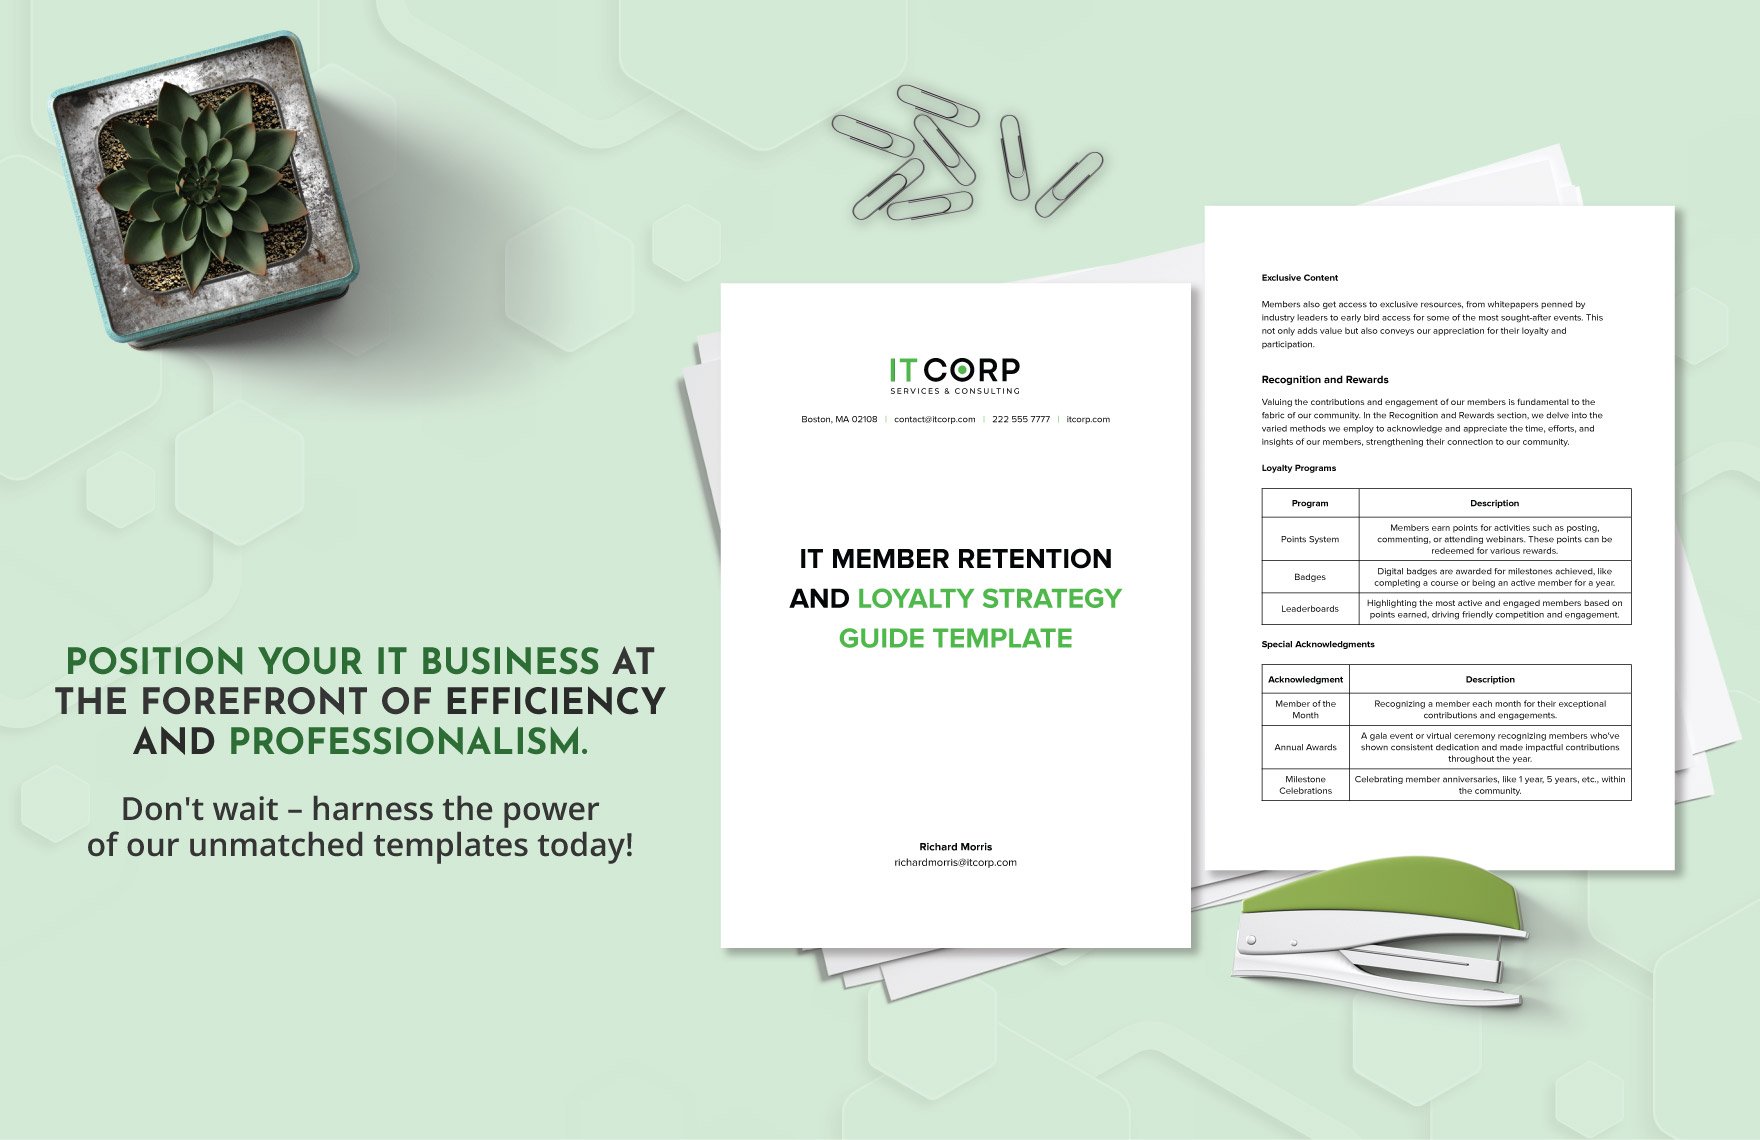 IT Member Retention and Loyalty Strategy Guide Template